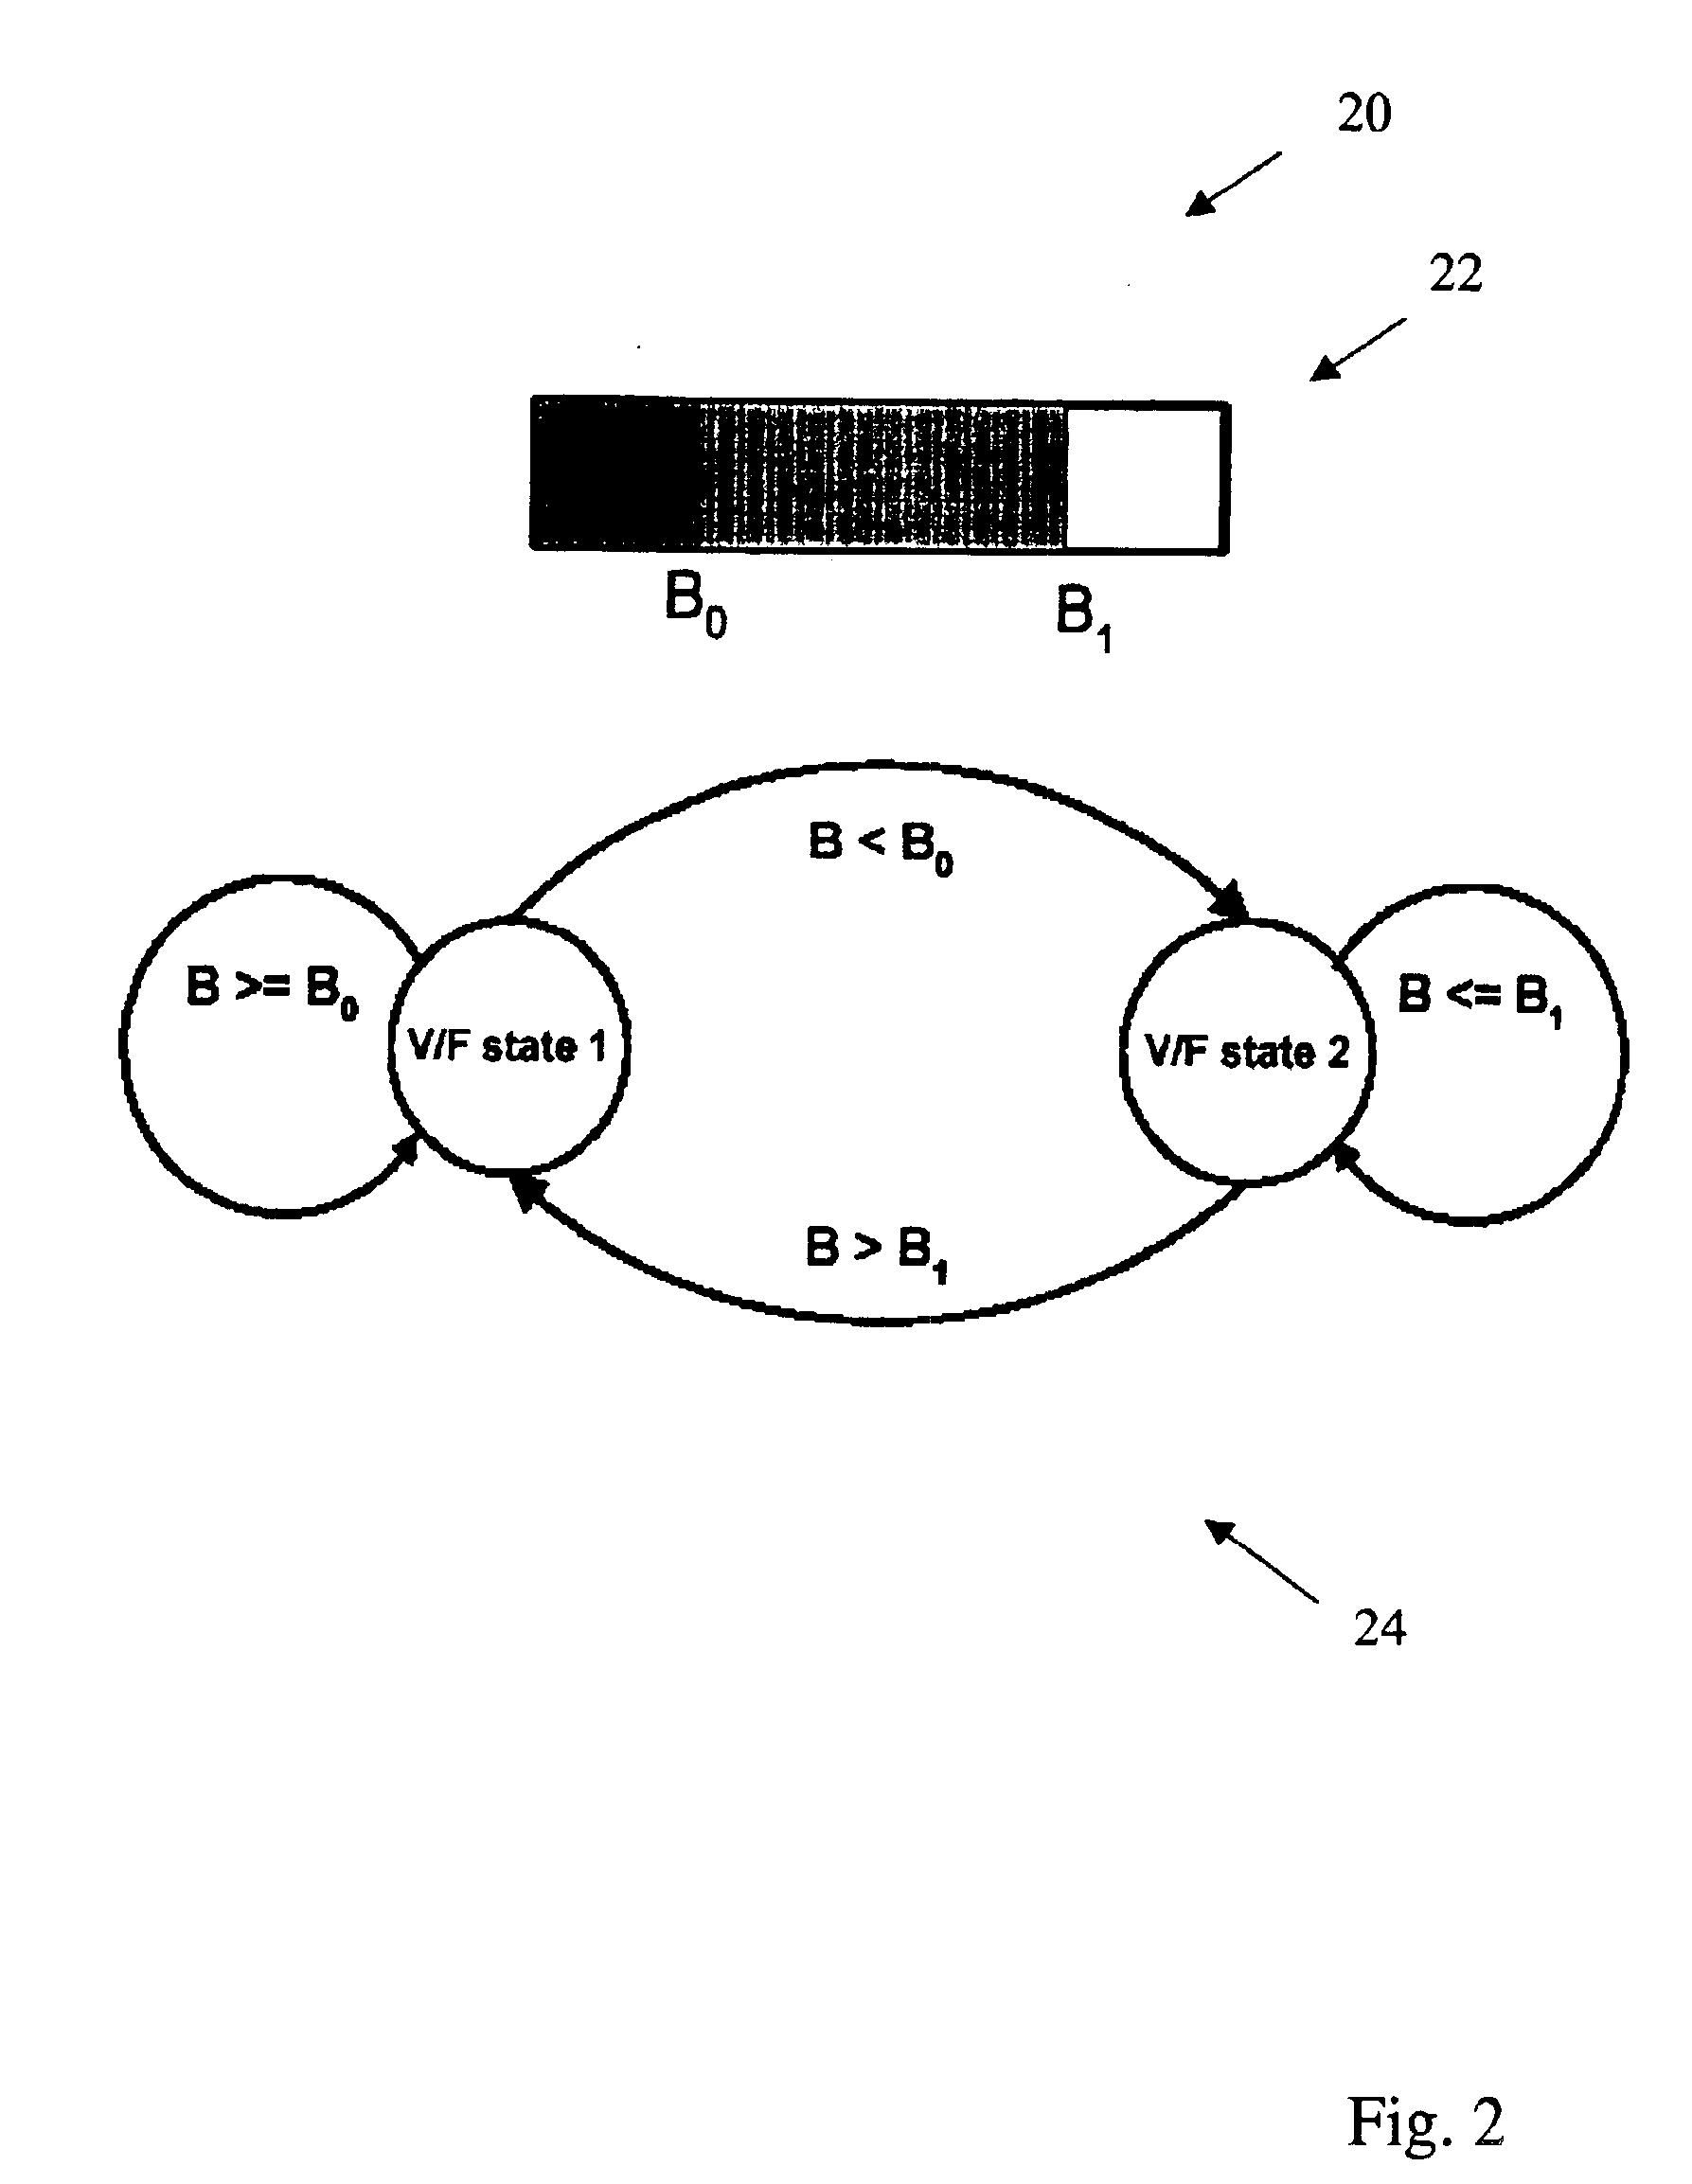 System and method for dynamic power management using data buffer levels